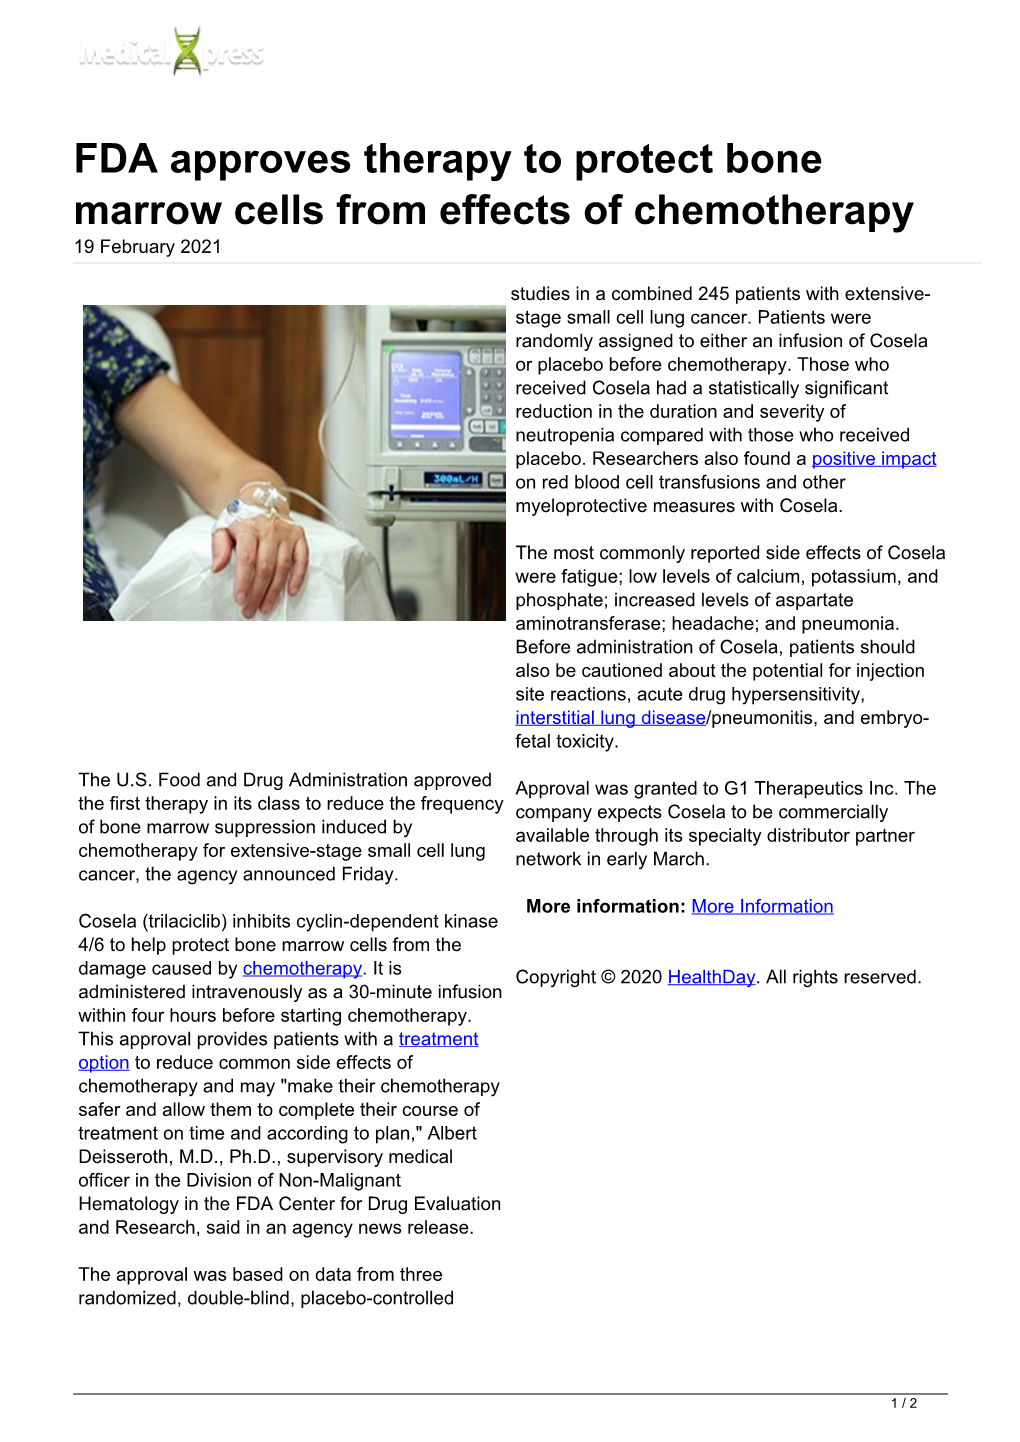 FDA Approves Therapy to Protect Bone Marrow Cells from Effects of Chemotherapy 19 February 2021